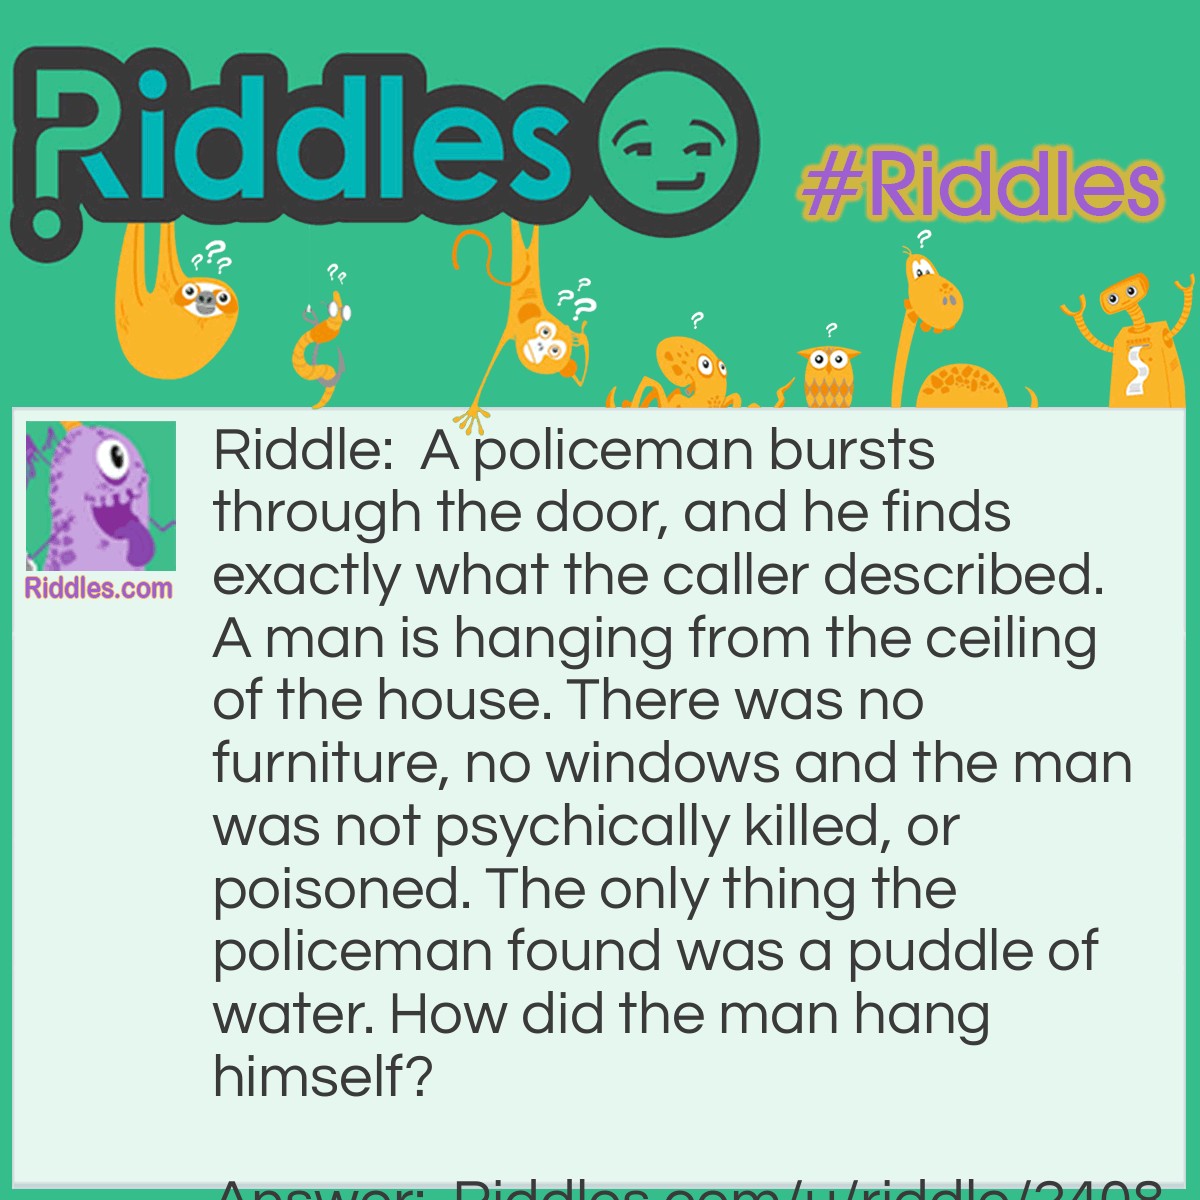 Riddle: A policeman bursts through the door, and he finds exactly what the caller described. A man is hanging from the ceiling of the house. There was no furniture, no windows and the man was not psychically killed, or poisoned. The only thing the policeman found was a puddle of water. How did the man hang himself? Answer: He stood on an ice cube to hang himself, which was slow and painful.